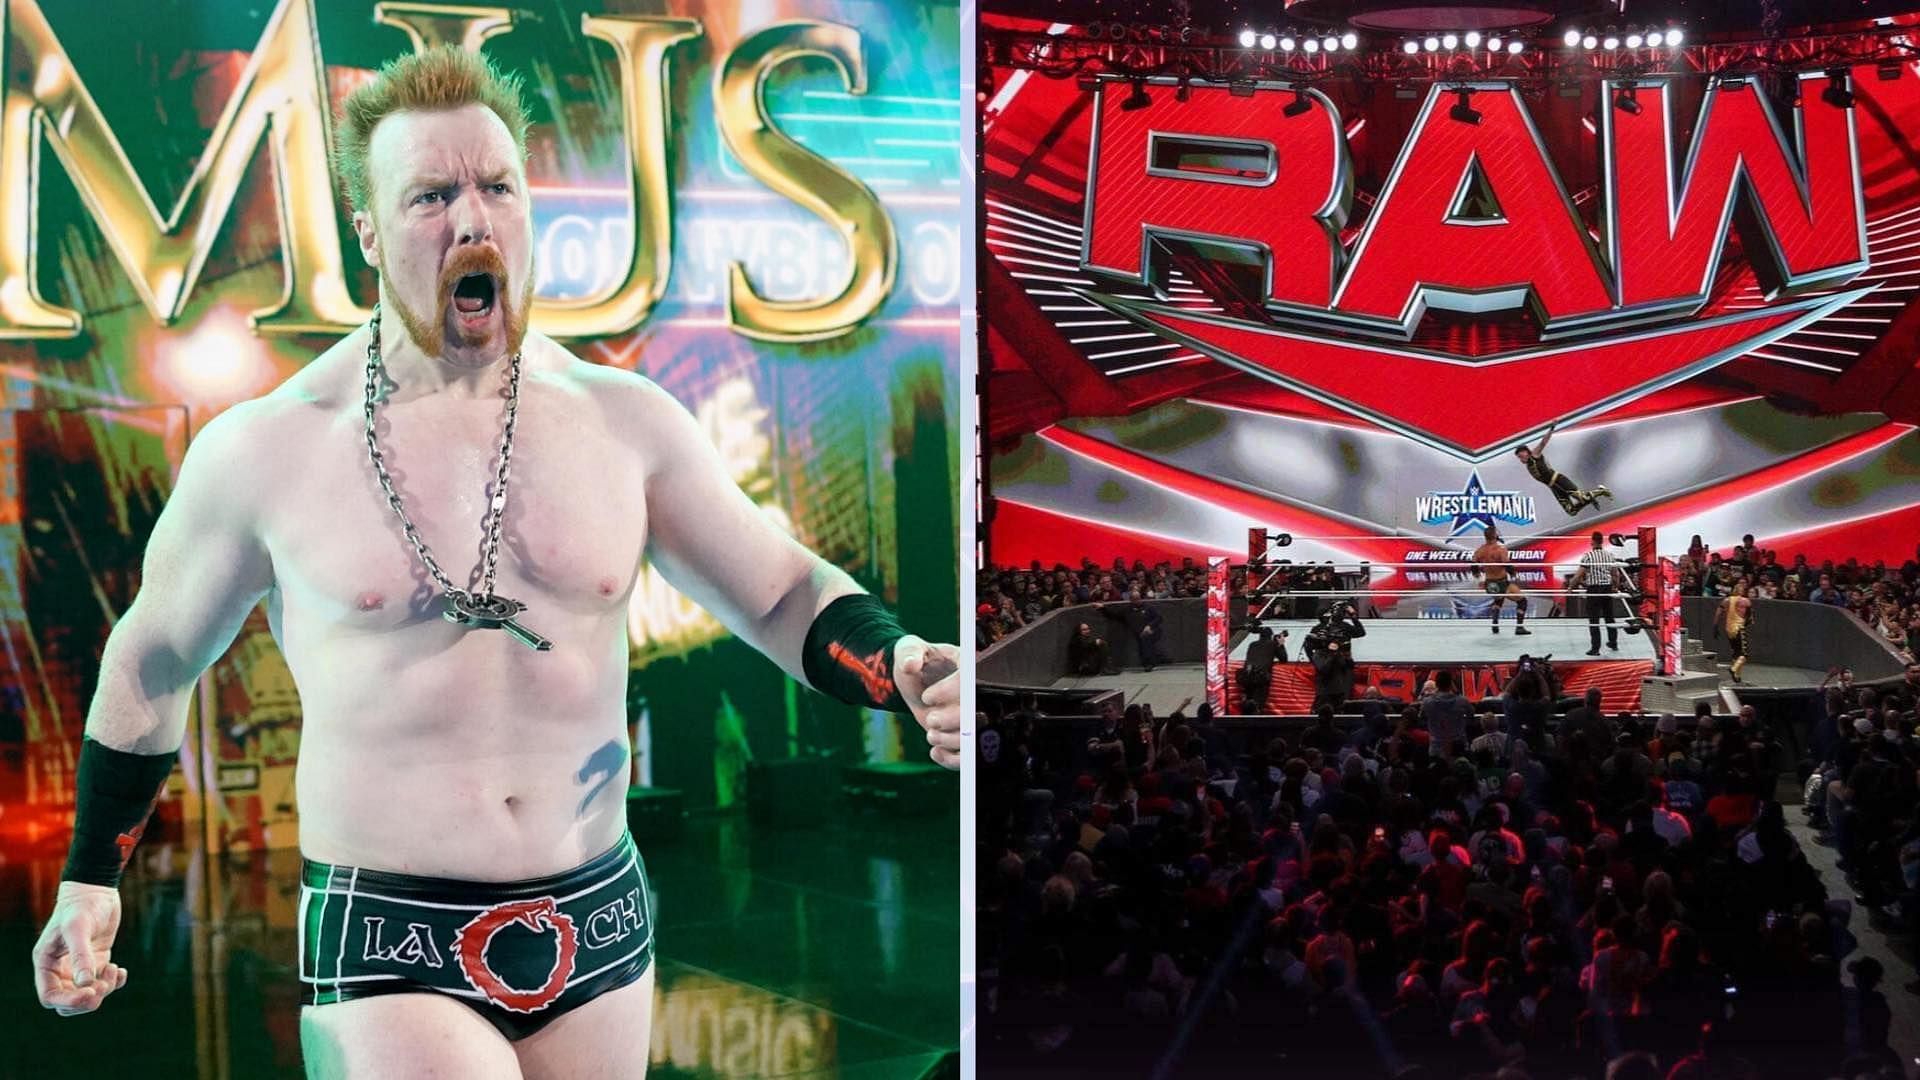 WWE RAW this week was live from the XL Center in Hartford, Connecticut